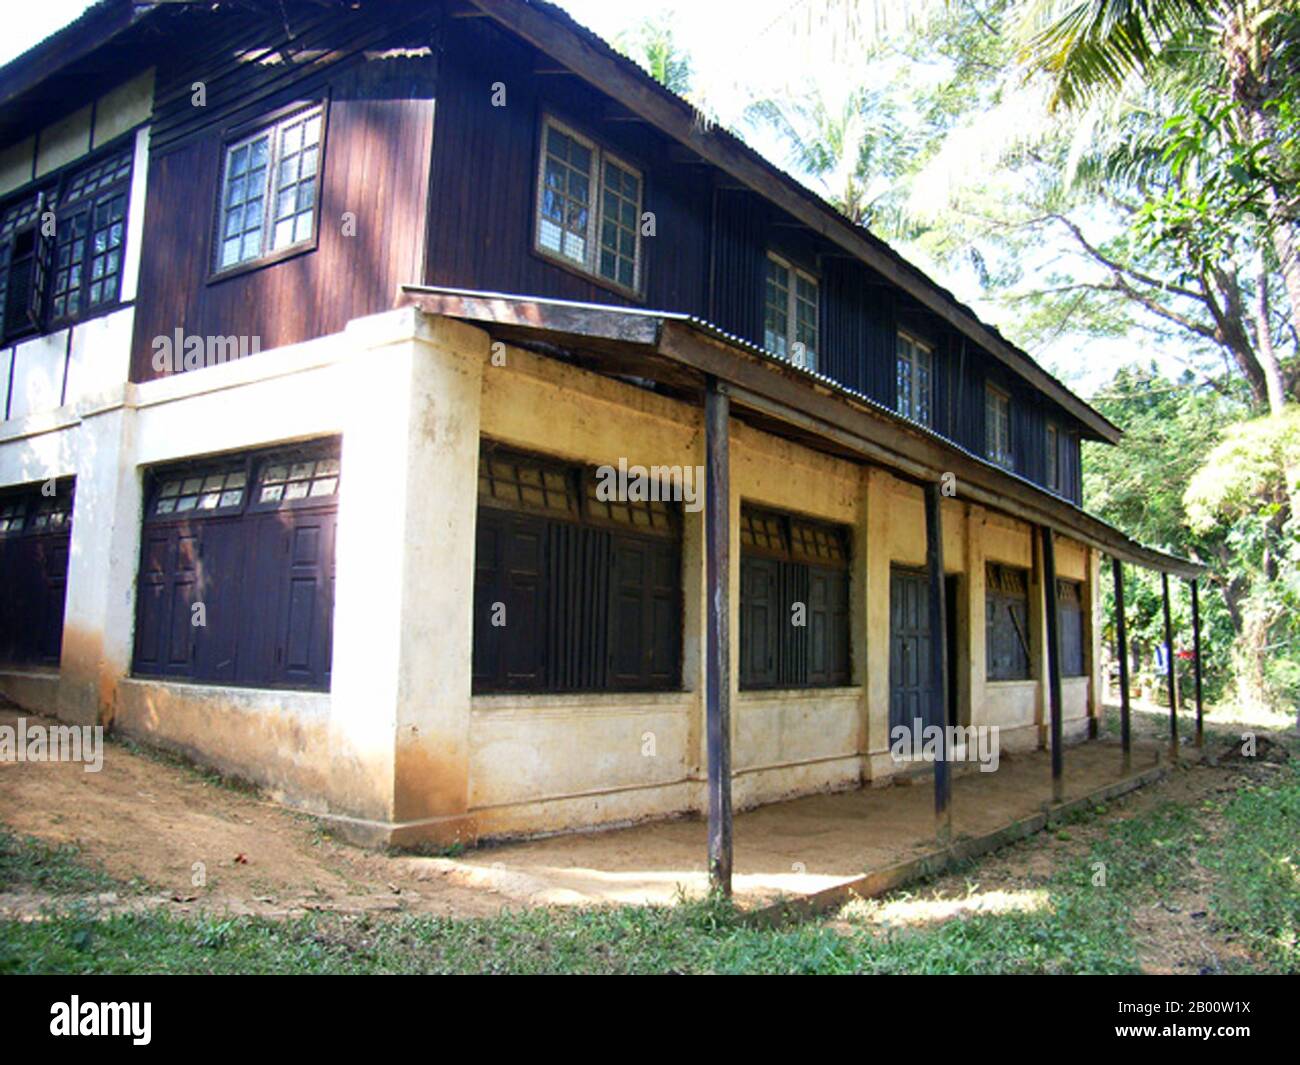 Burma/Myanmar: The former British Club in Katha, 2006. In Orwell's time it consisted of only the ground floor, and is thought to have served as the model for the British Club in 'Burmese Days' (1934).  George Orwell’s grandmother lived at Moulmein. In October 1922 he sailed on board S.S. Herefordshire to join the Indian Imperial Police in Burma. At the end of 1924 he was promoted to Assistant District Superintendent and posted to Syriam. In April 1926 he moved to Moulmein, where his grandmother lived. At the end of that year, he went to Katha, where he contracted Dengue fever in 1927. Stock Photo